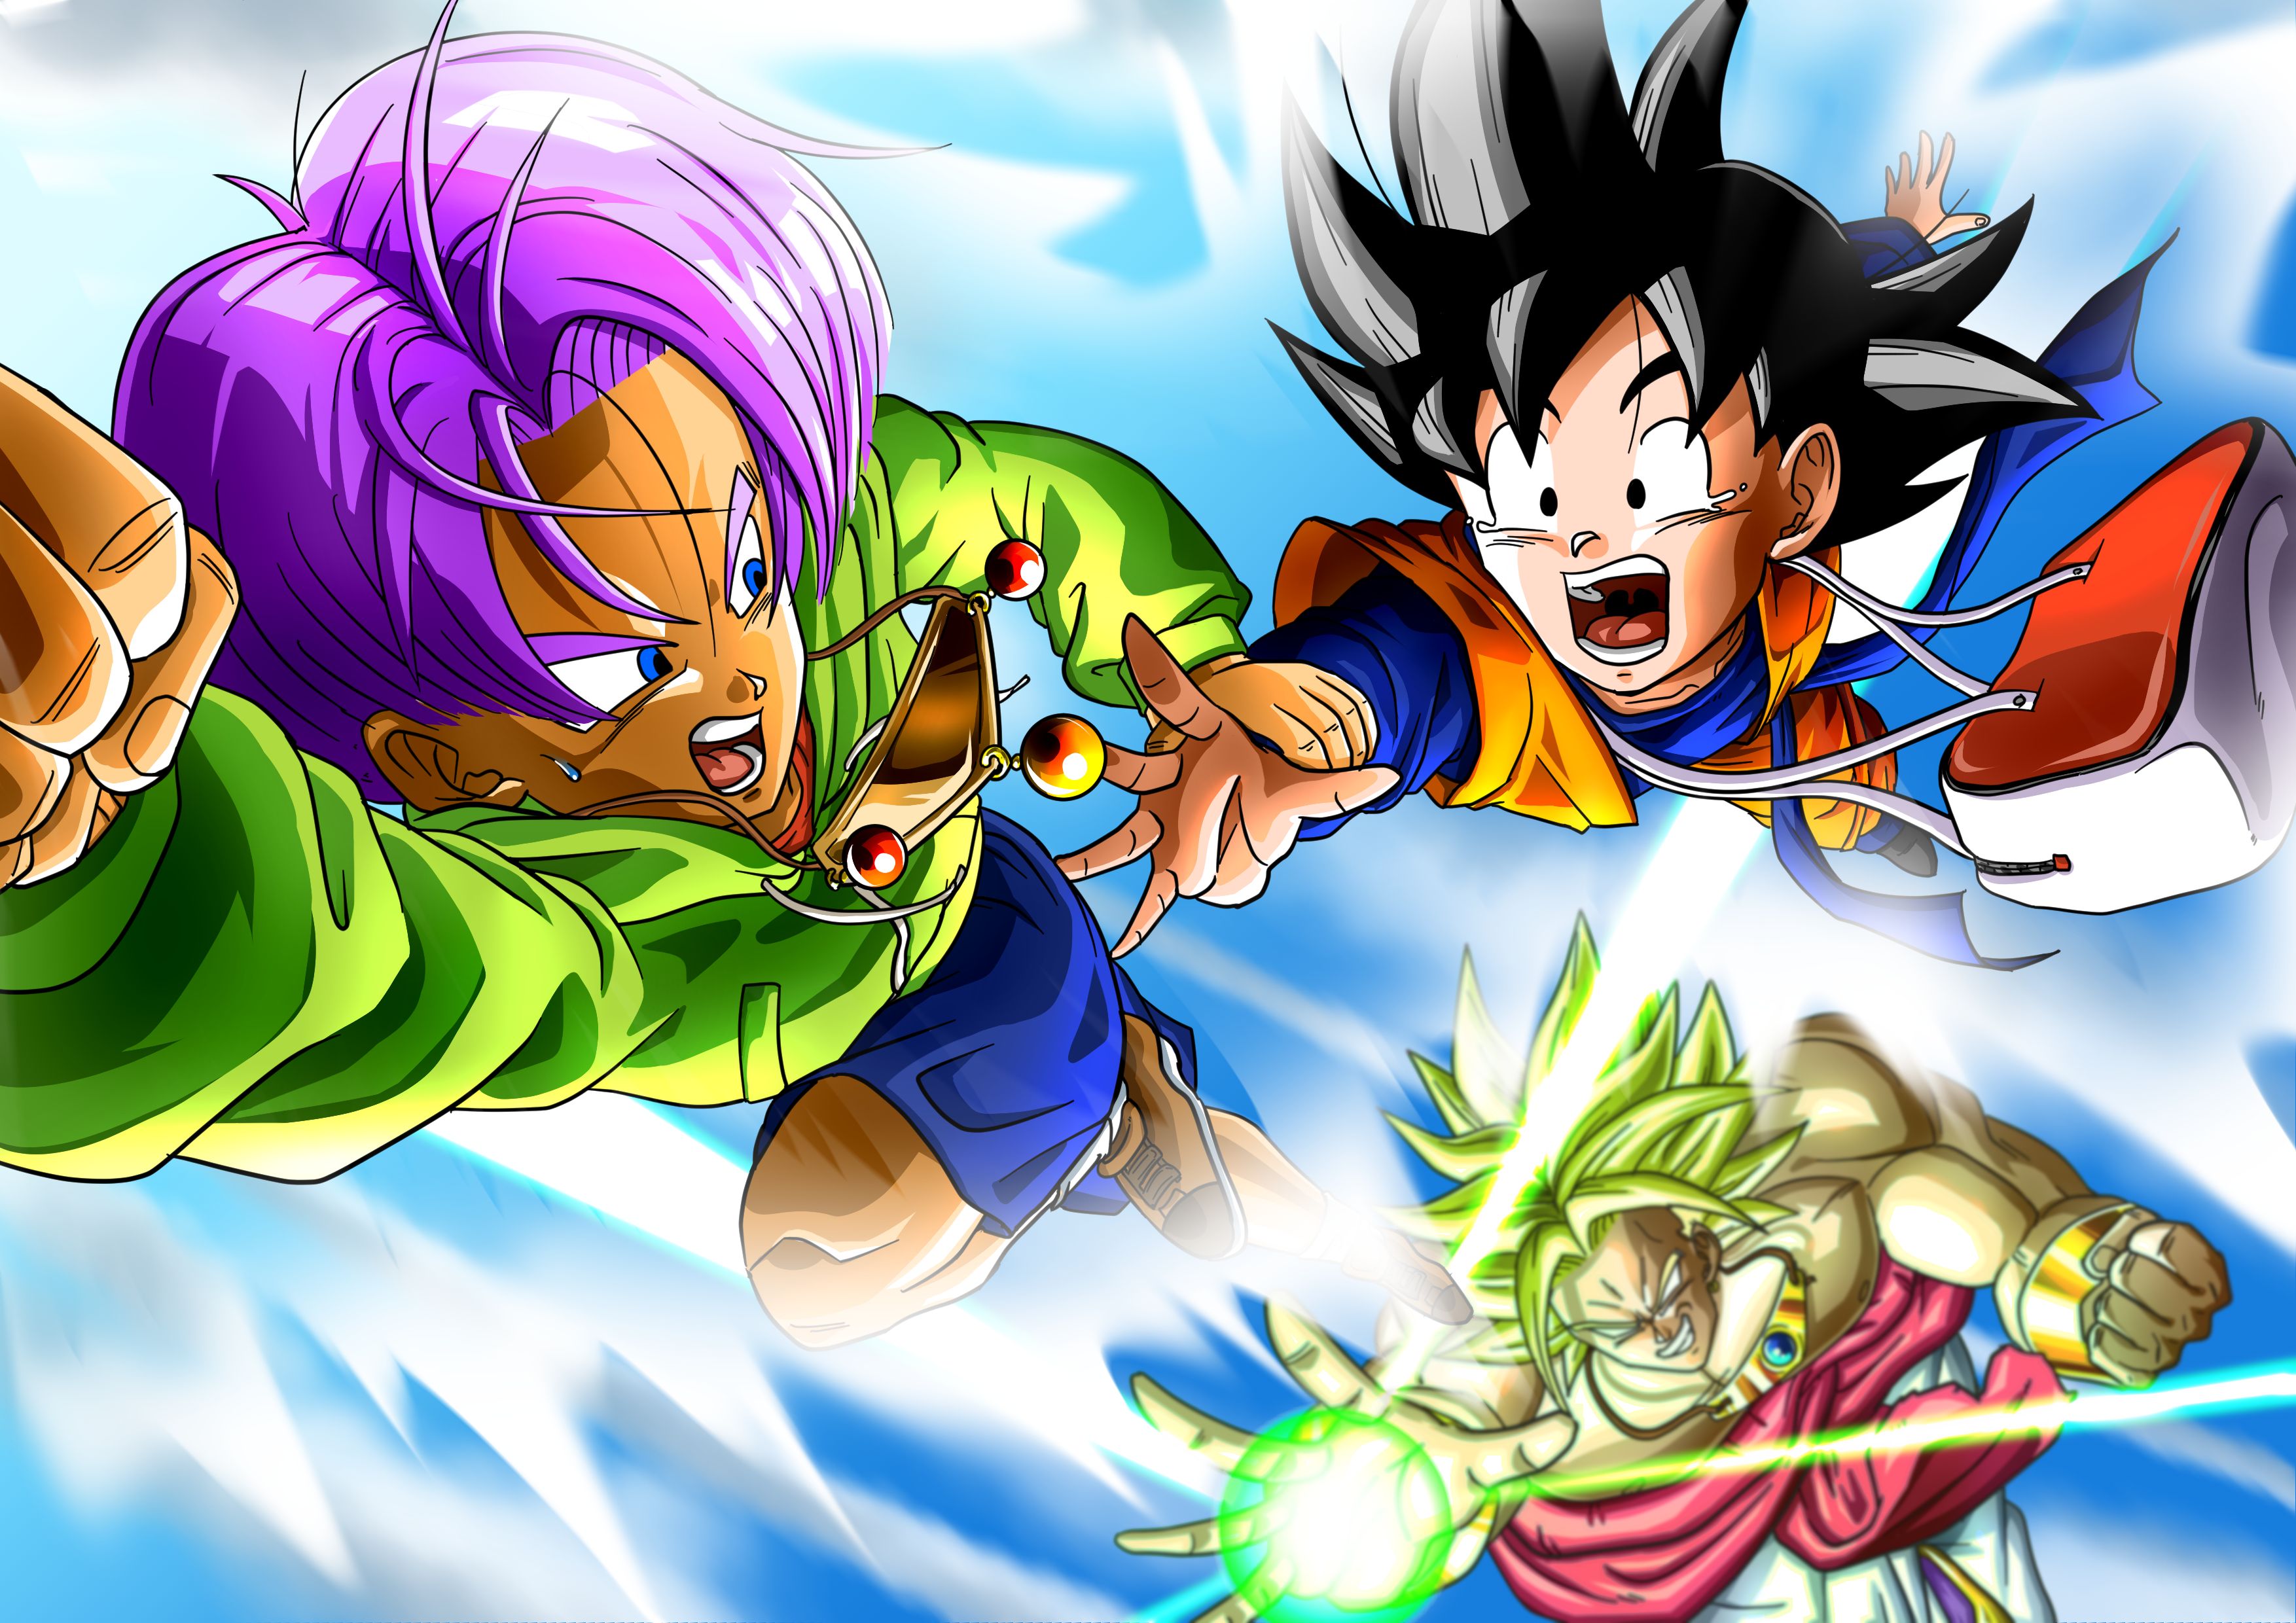 Dragon Ball Z: Broly Second Coming wallpapers for desktop, download free Dragon  Ball Z: Broly Second Coming pictures and backgrounds for PC 